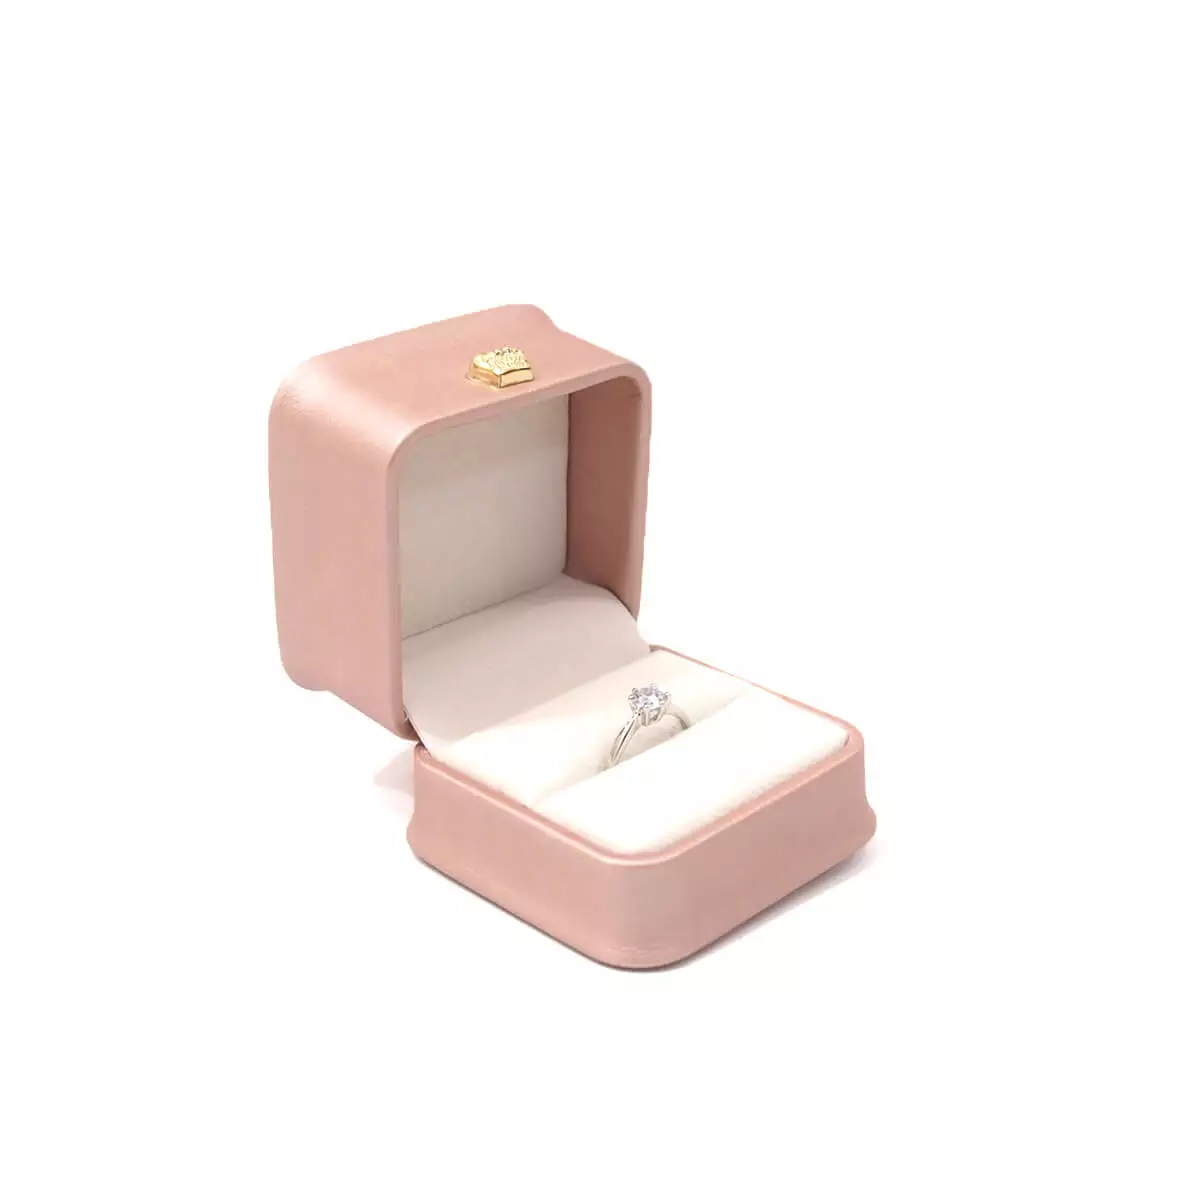 posie ring box in pink left side view